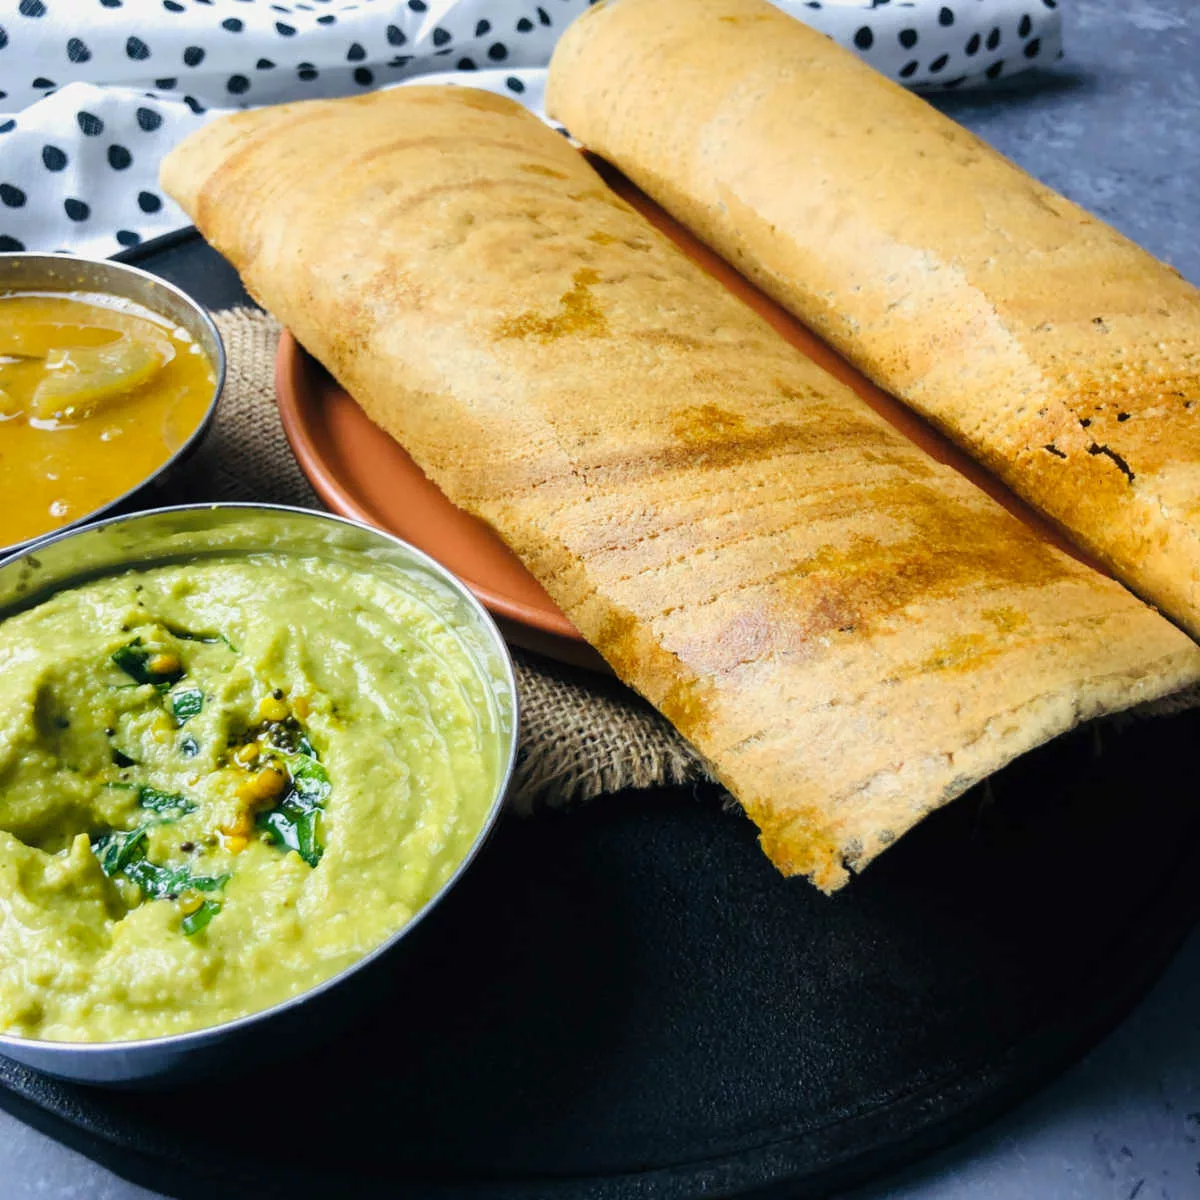 Chutney and sambar served with the millet dosa.